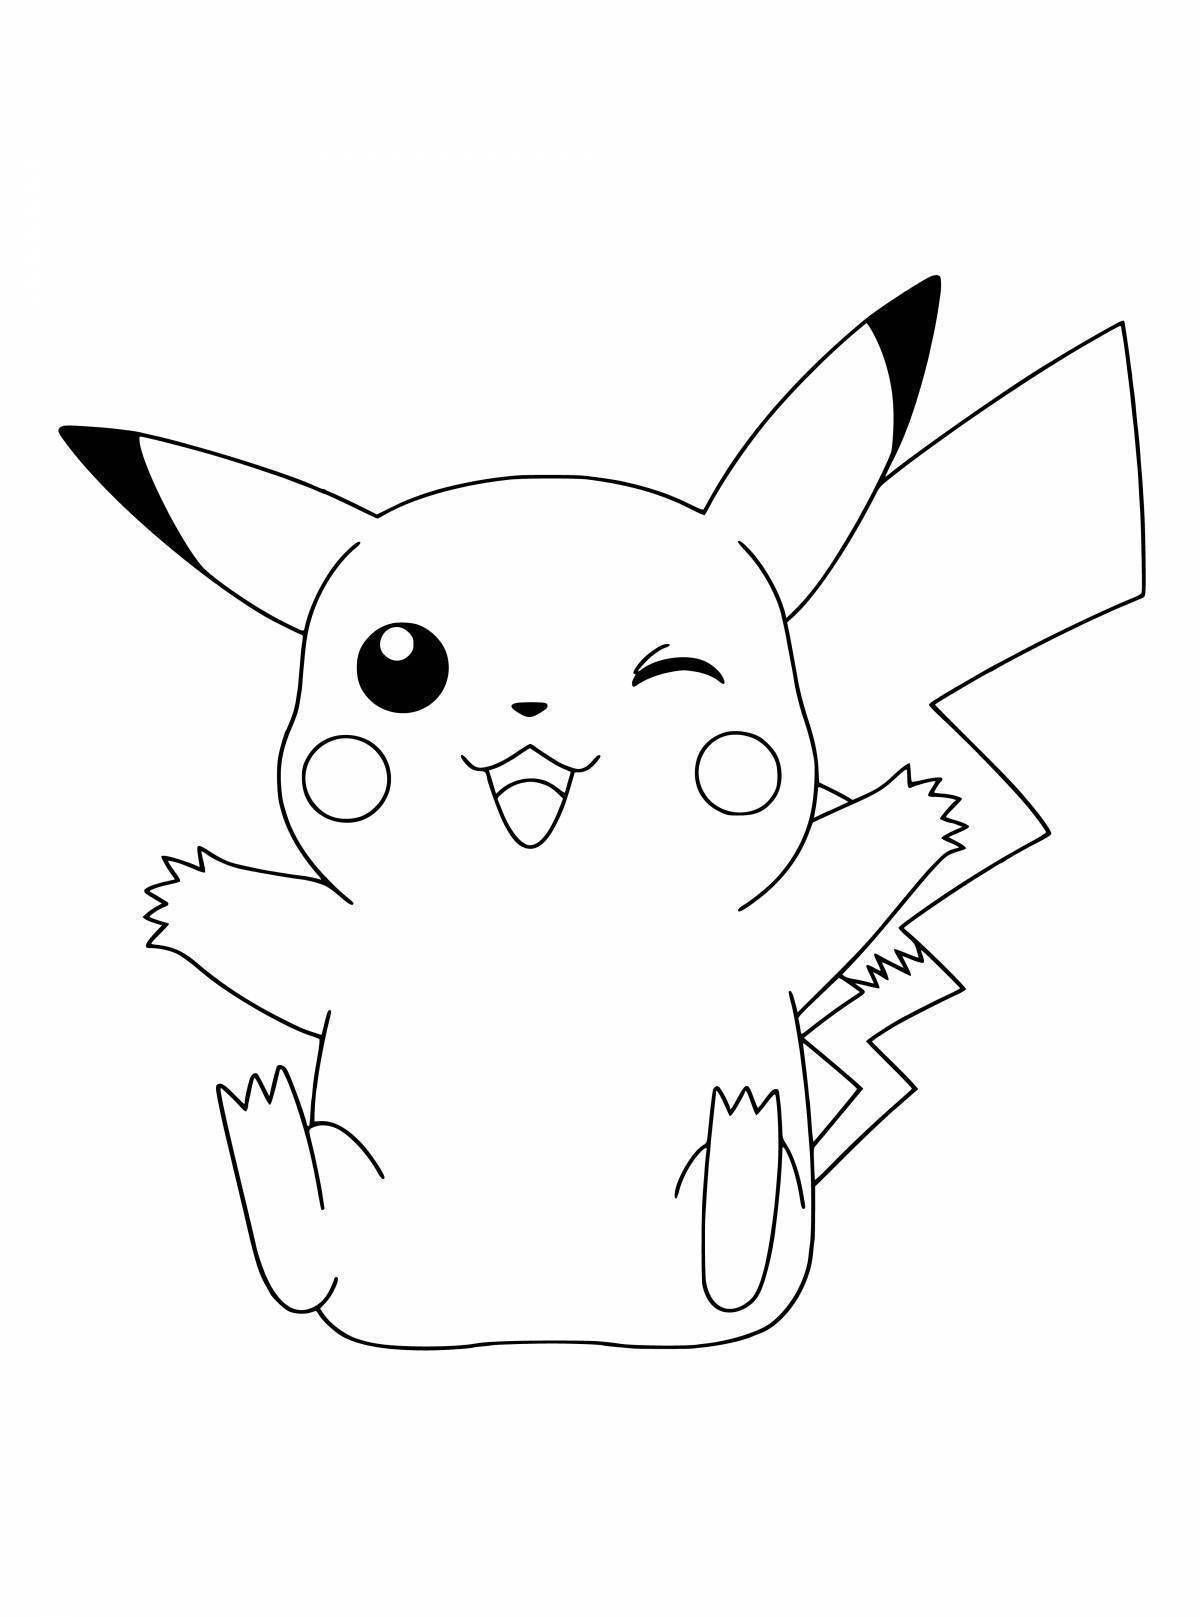 Adorable pikachu coloring pages for girls